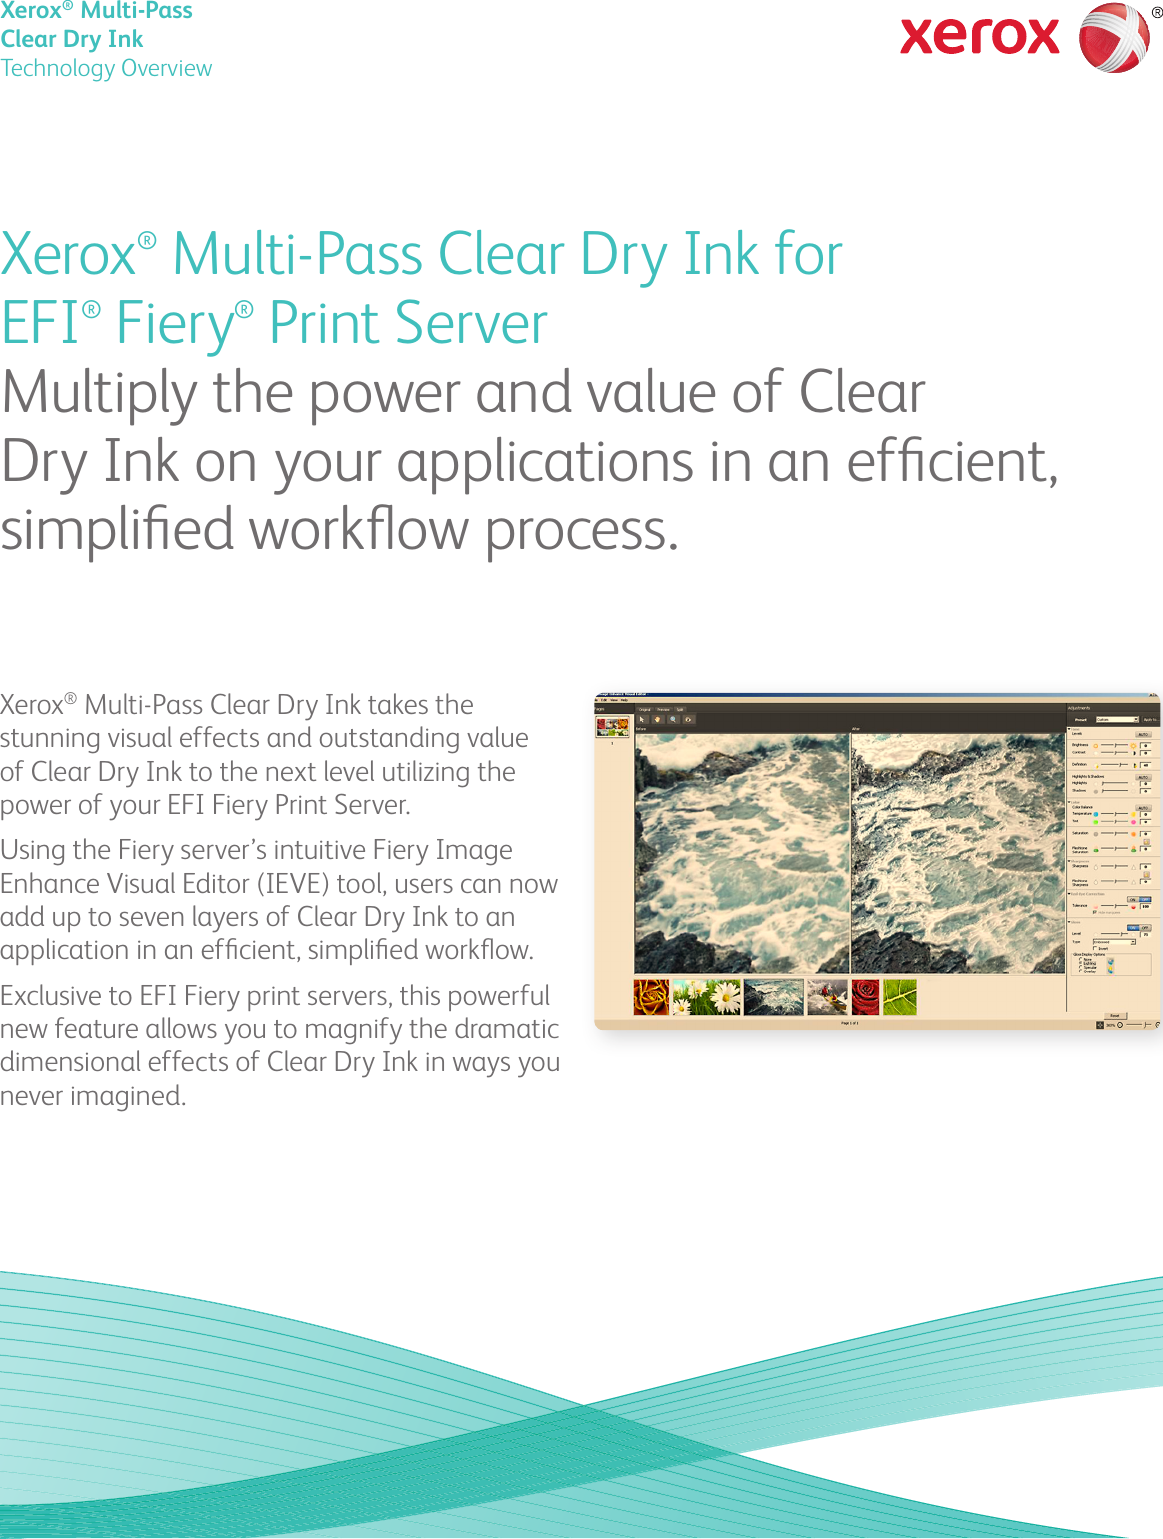 Page 1 of 2 - Xerox Xerox-Color-800I-1000I-Presses-Brochure- Xerox® Multi-Pass Clear Dry Ink For EFI® Fiery® Print Server - Technology Overview (PDF, 2 MB)  Xerox-color-800i-1000i-presses-brochure